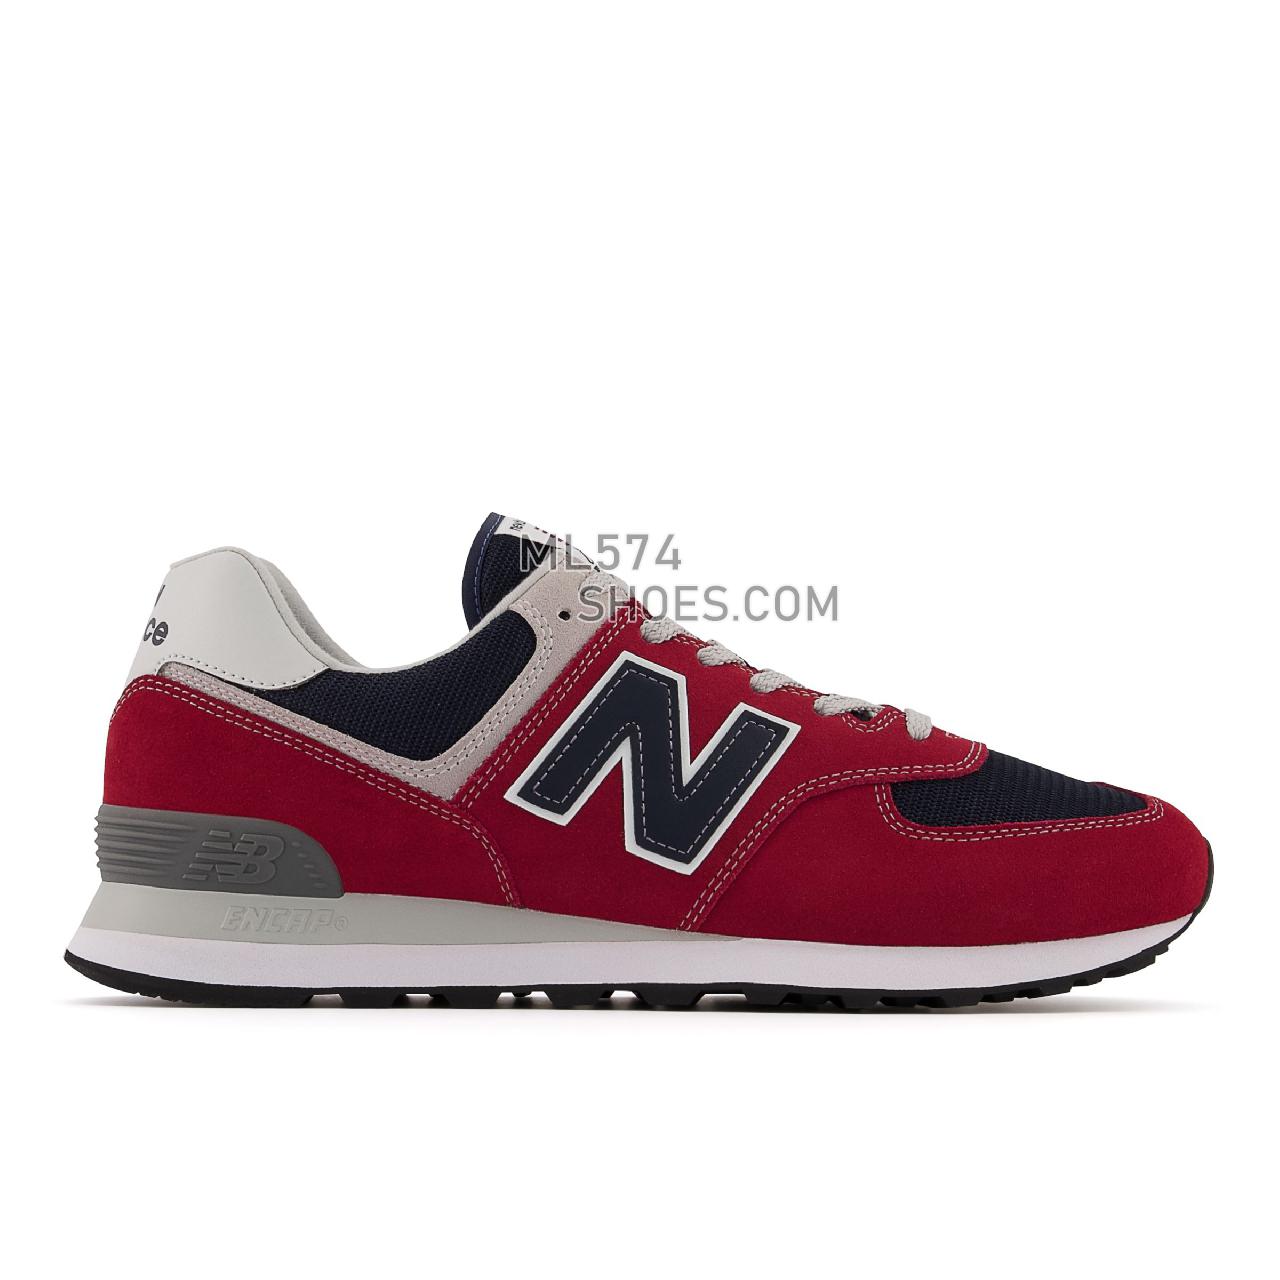 New Balance 574v2 - Men's Classic Sneakers - Red with Navy - ML574EH2